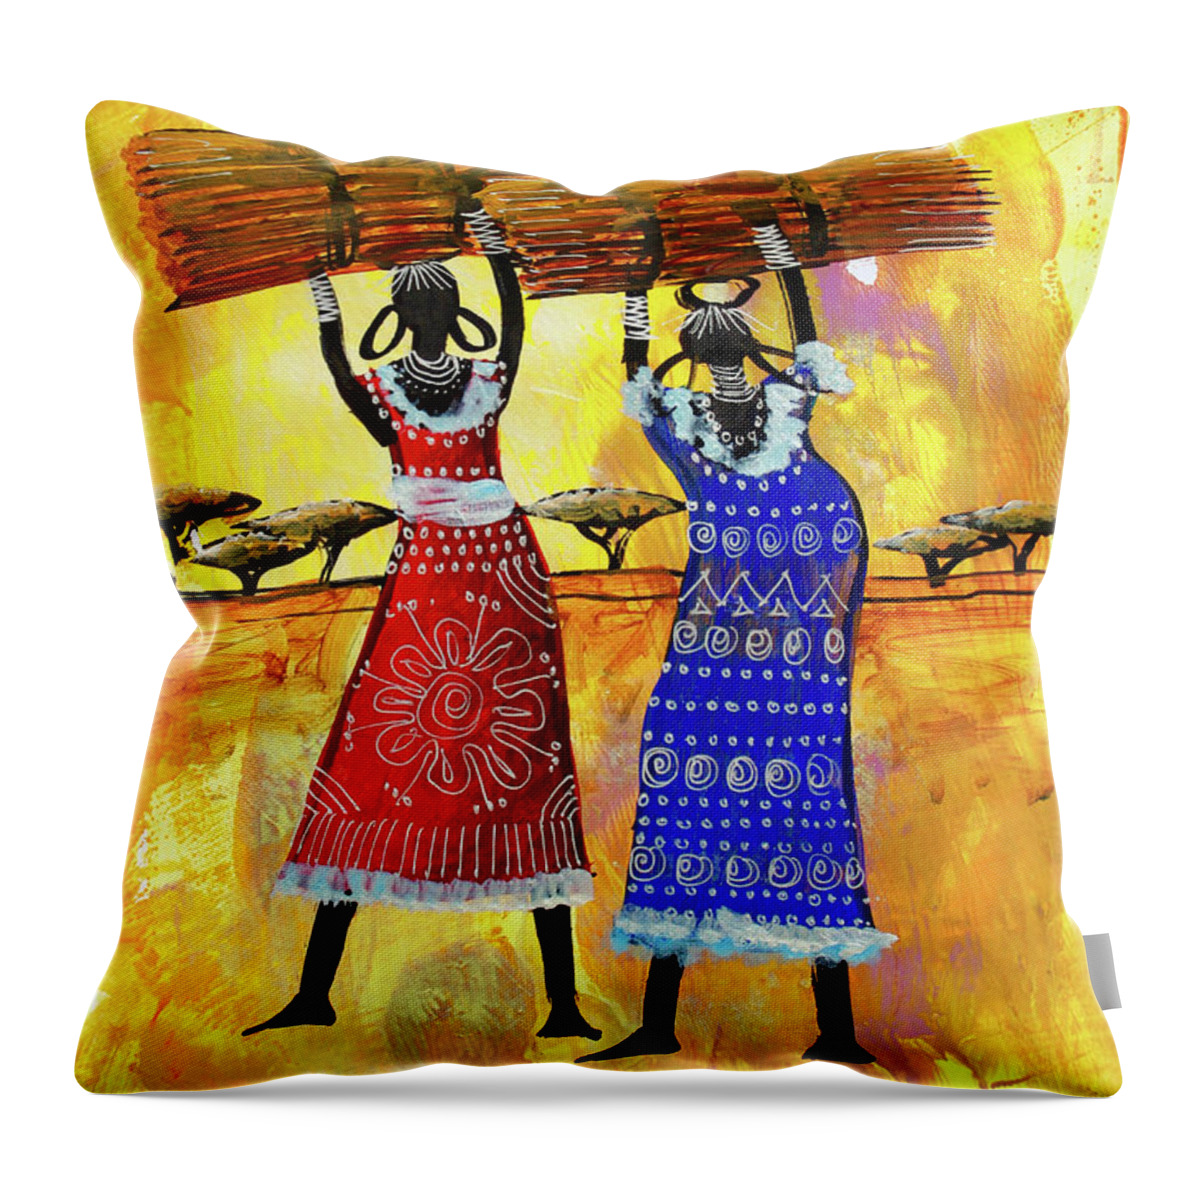 Africa Throw Pillow featuring the painting B-351 #1 by Martin Bulinya